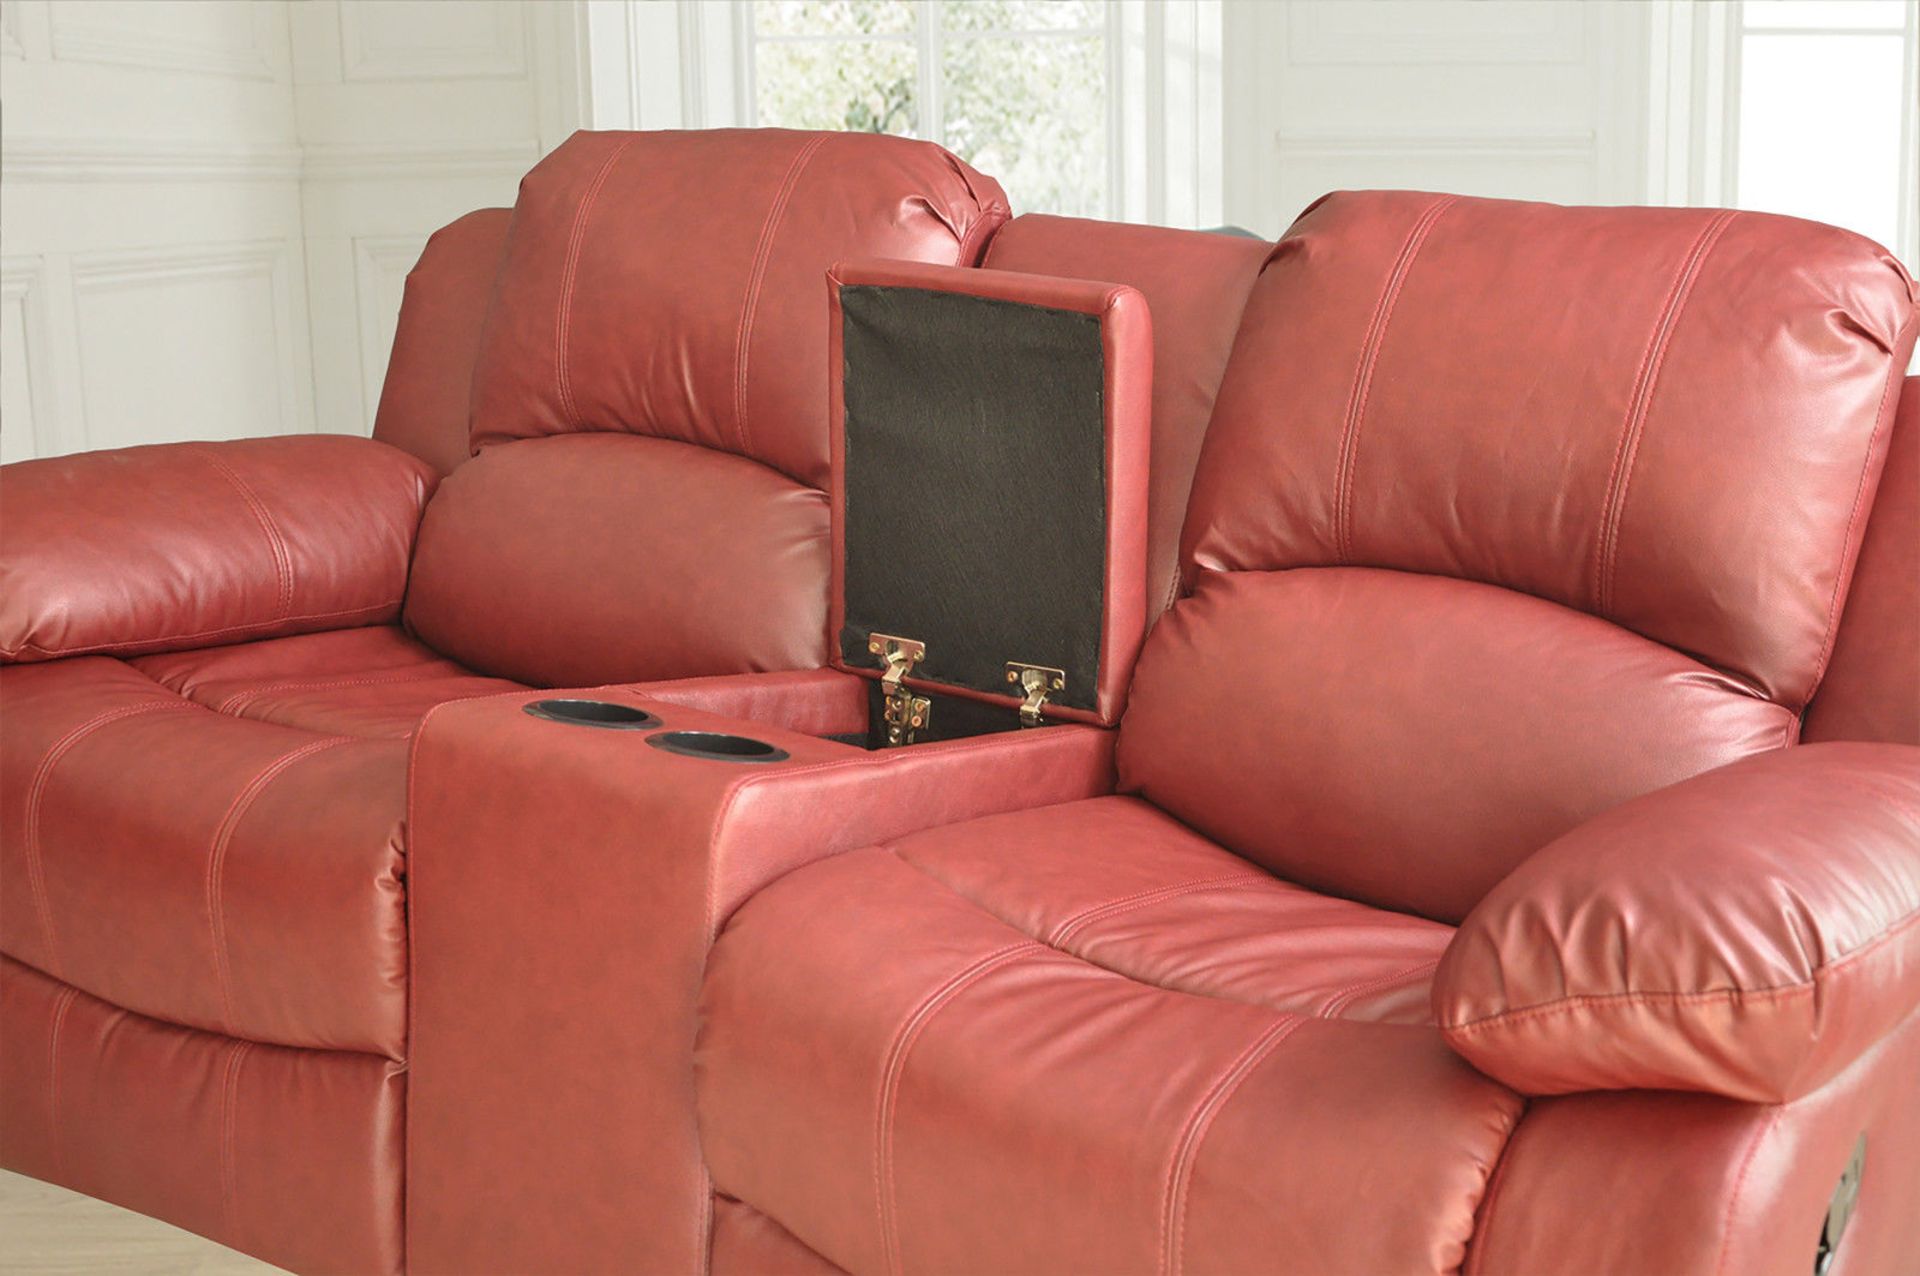 Supreme Valance burgandy leather 3 seater reclining sofa with console and matching 2 seater - Image 2 of 3